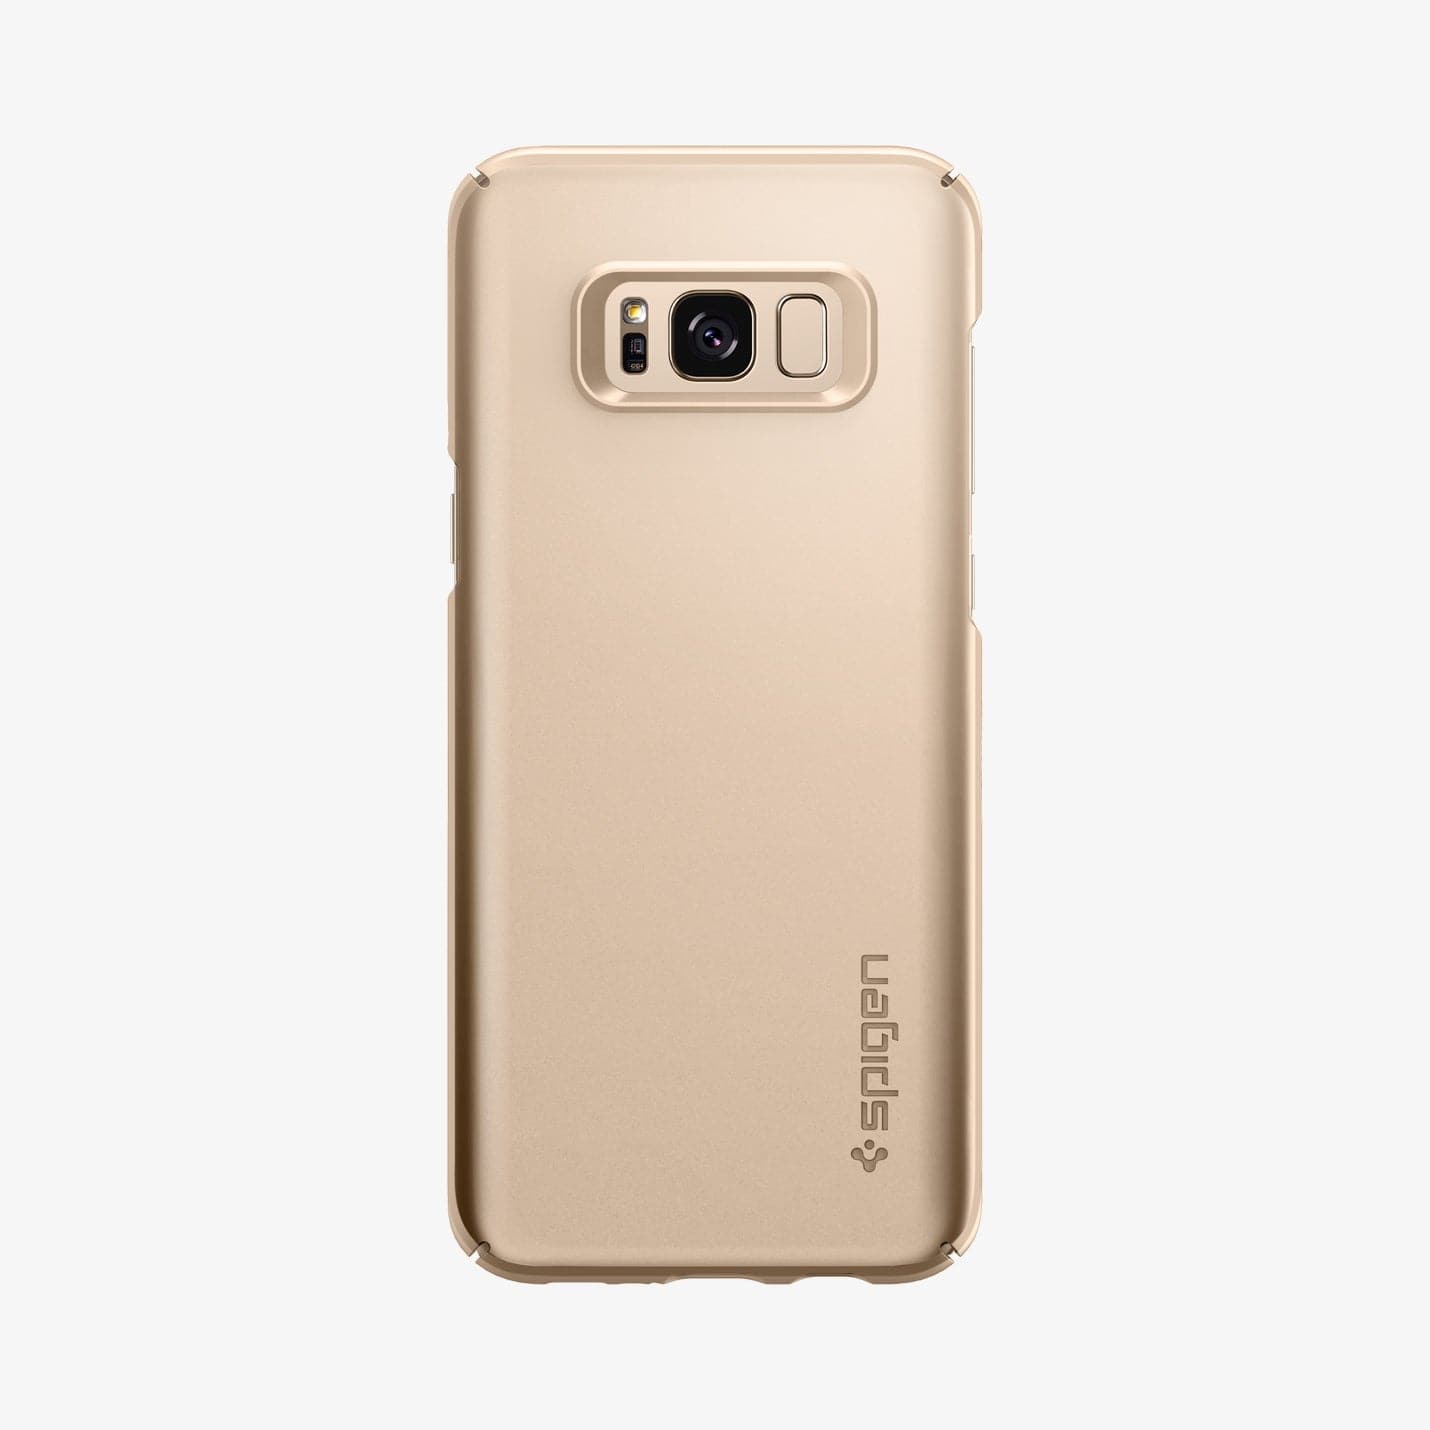 565CS21622 - Galaxy S8 Series Thin Fit Case in maple gold showing the back